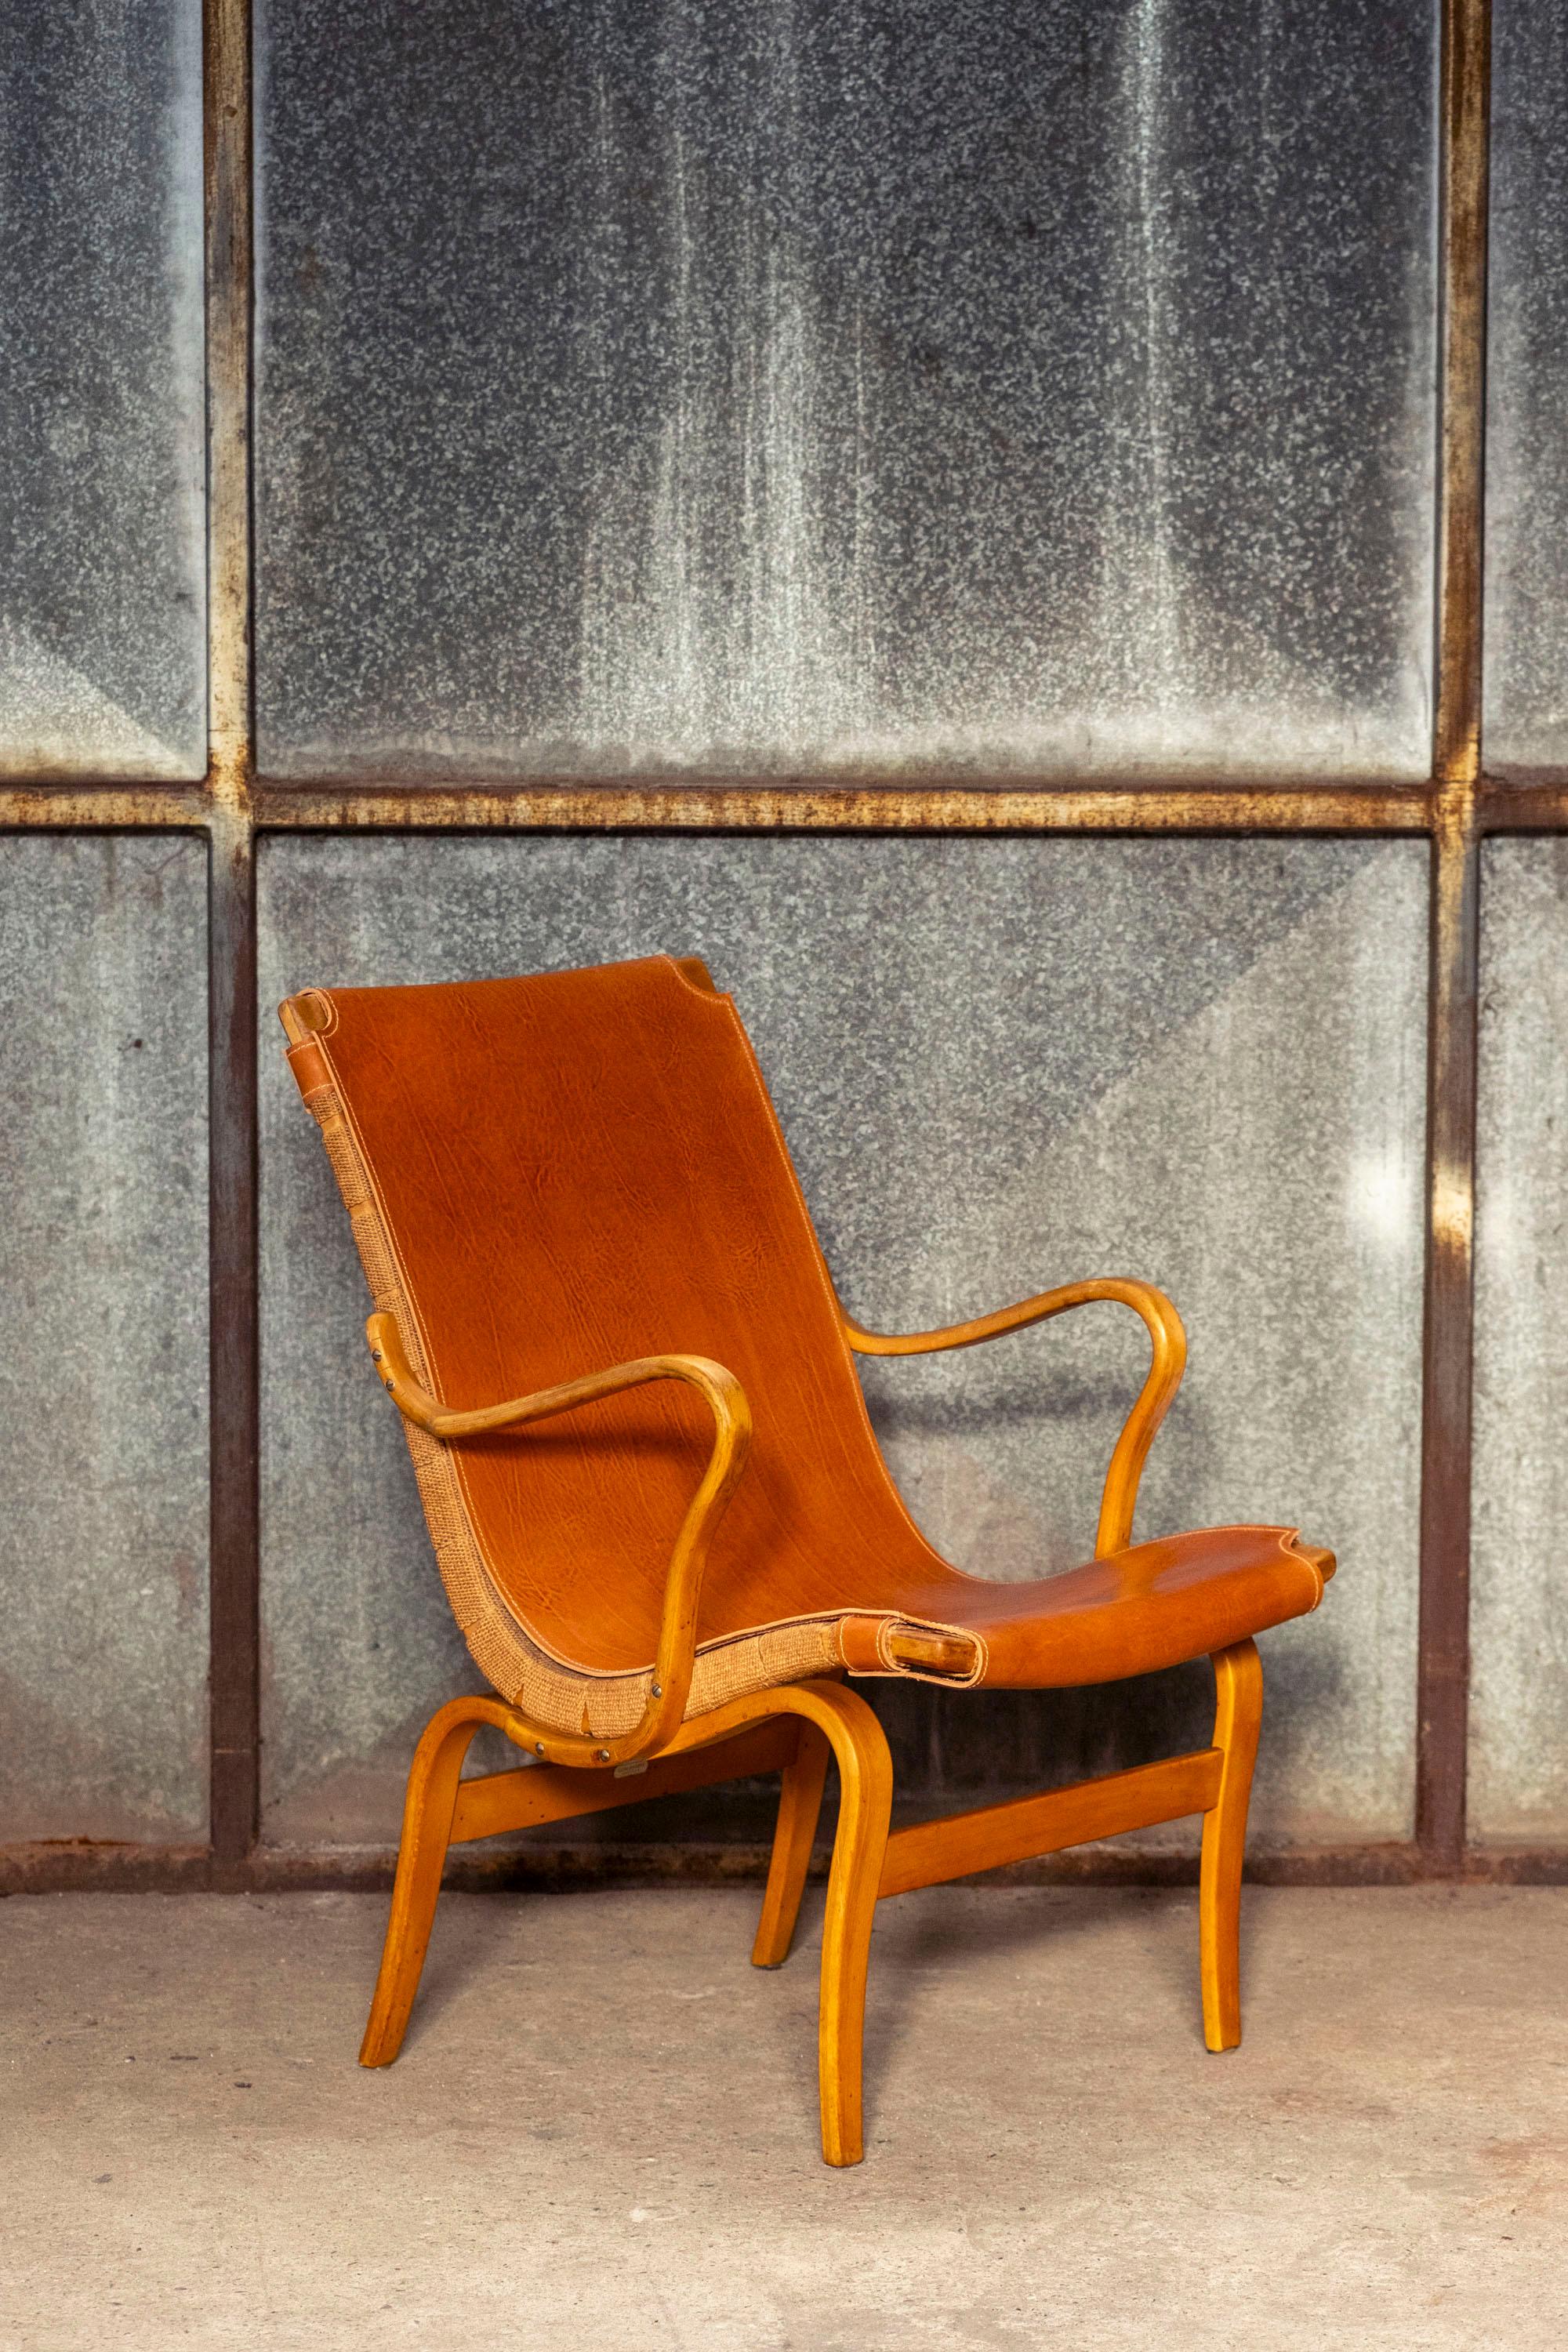 First generation of the Eva lounge chair by Bruno Mathsson with full grain leather upholstered sleeve which is completely saddle stitched.
Produced in the 1960s by Karl Mathsson in Sweden.
Functional, elegant and comfortable armchair.
Maker's mark